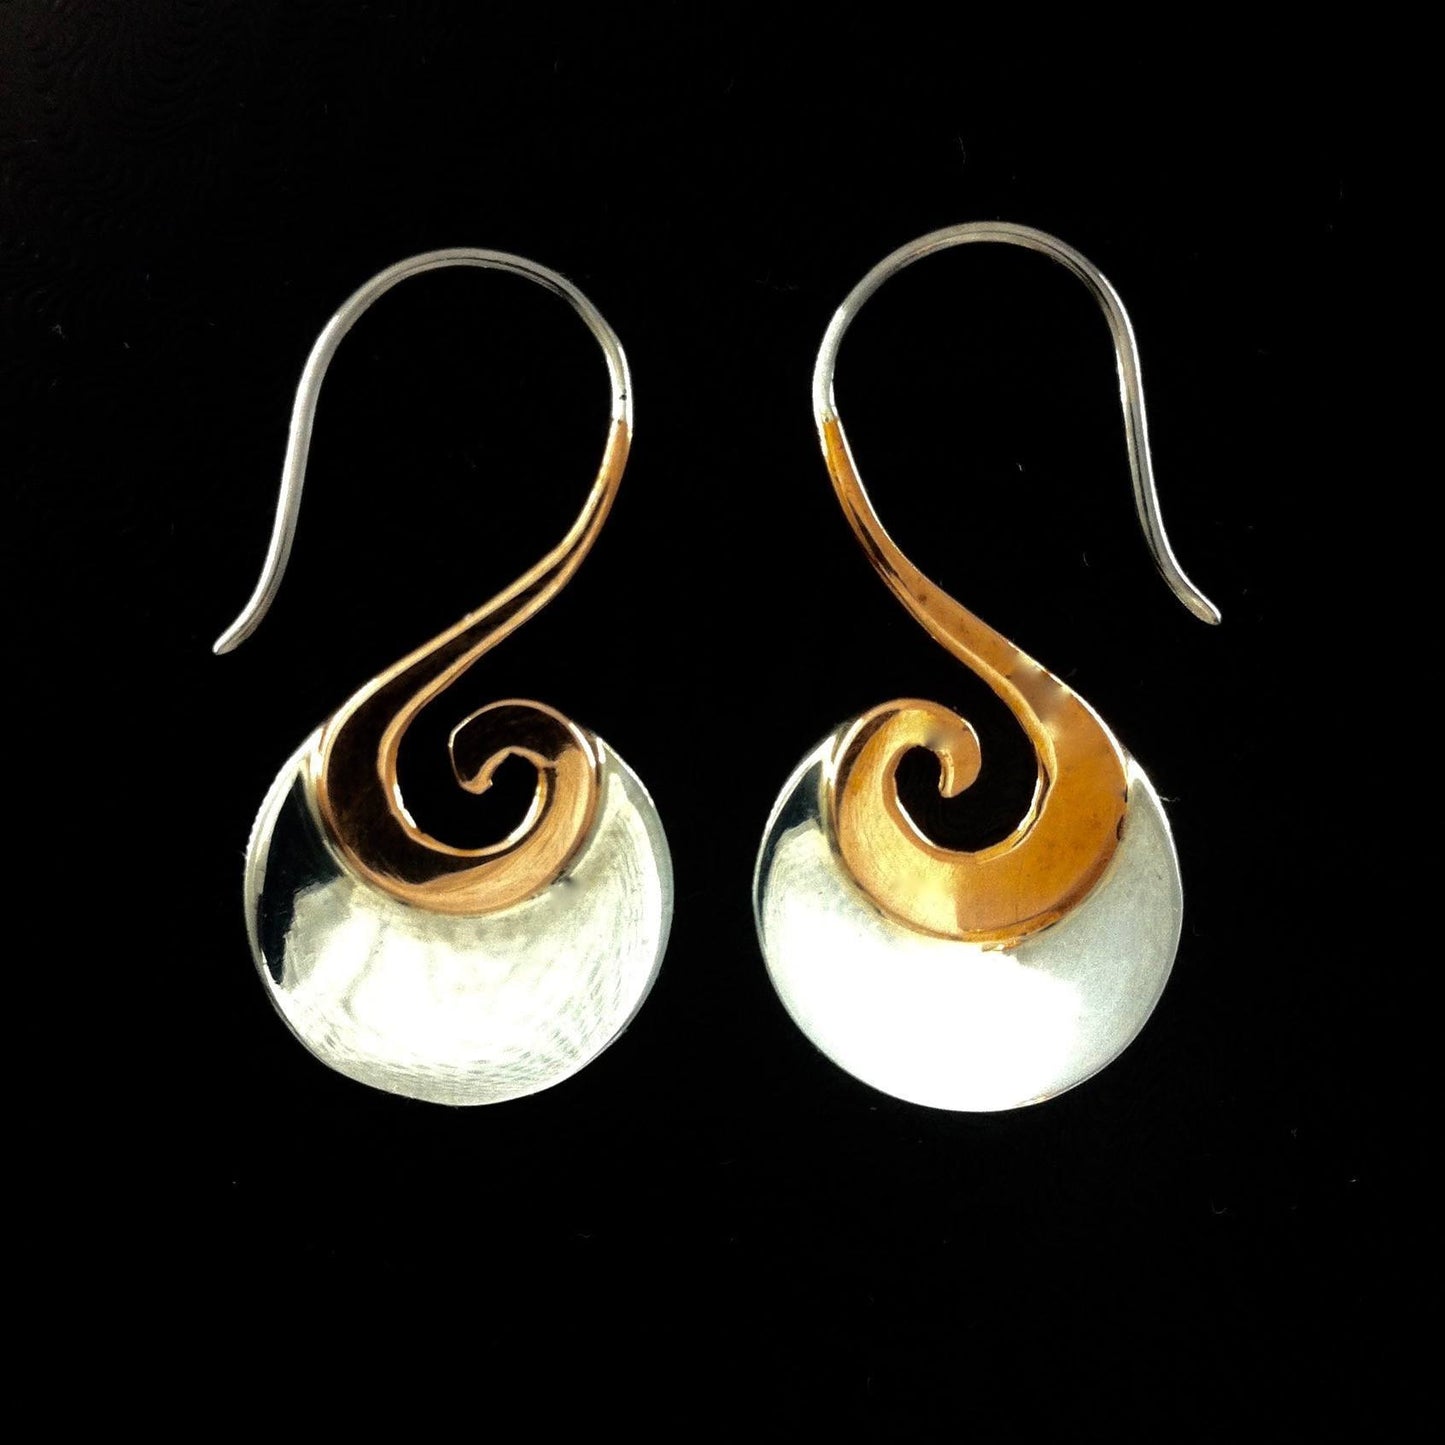 Tribal Earrings :|: Lined Spiral. sterling silver with copper highlights earrings.